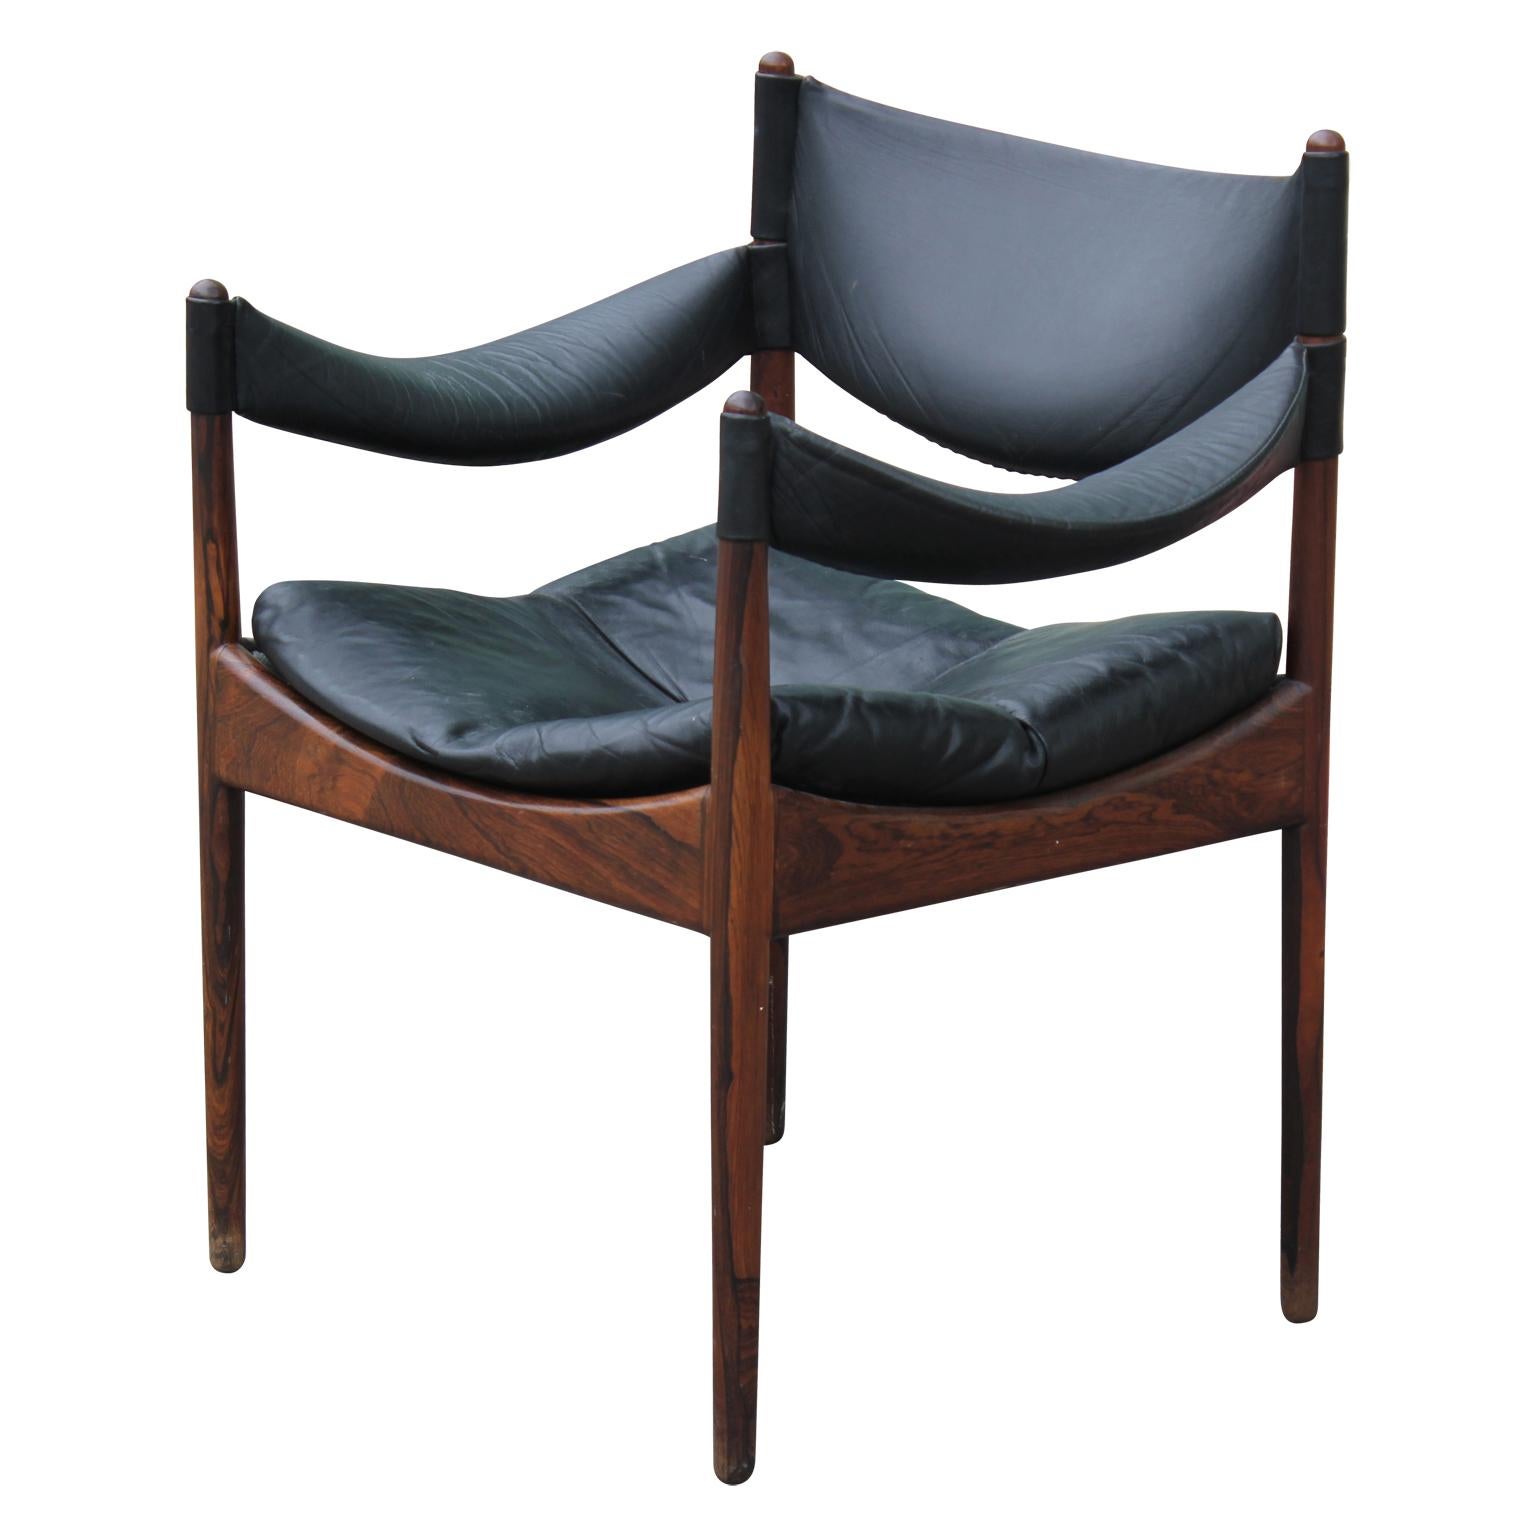 Sleek Mid-Century Modern Danish lounge chair in rosewood model Modus. This leather and rosewood chair was designed by Kristian Vedel for Søren Willadsen, Denmark. This is Vedel's most popular design and came in slightly different variations.